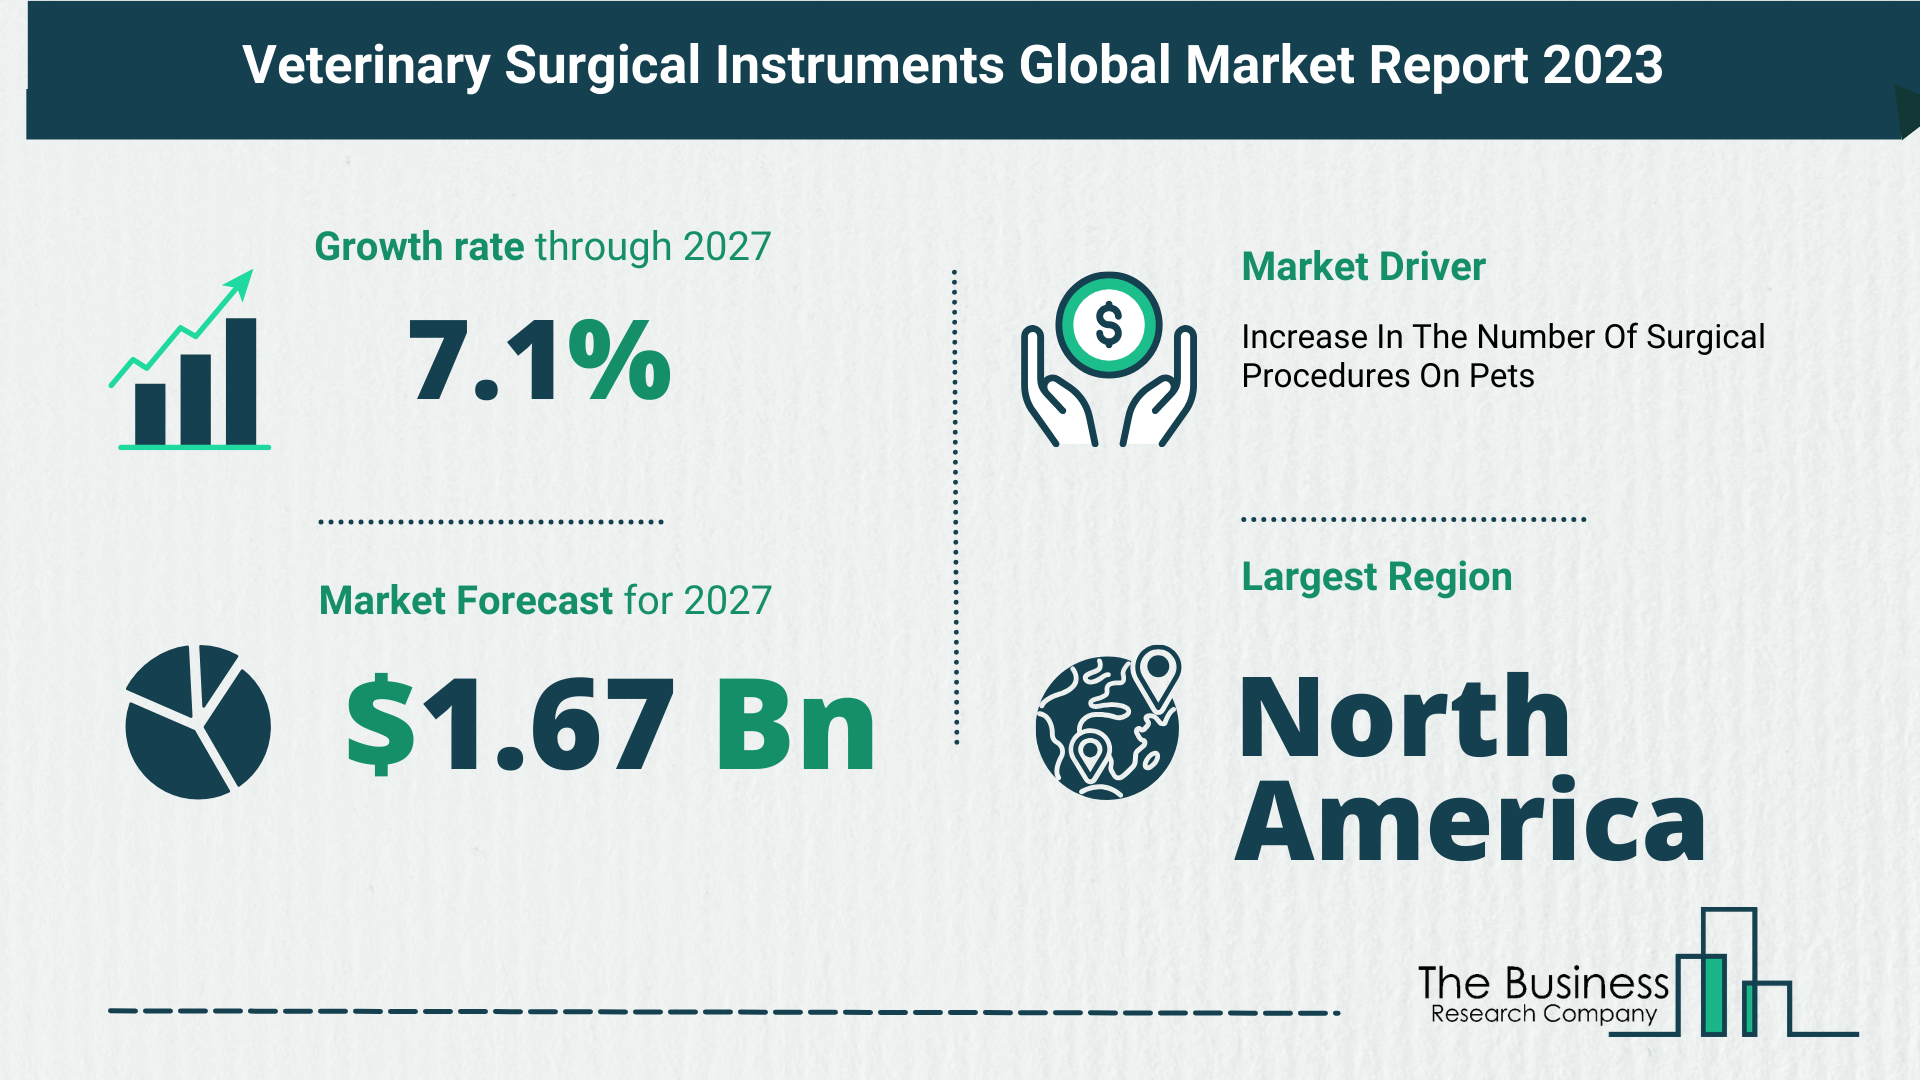 Top 5 Insights From The Veterinary Surgical Instruments Market Report 2023